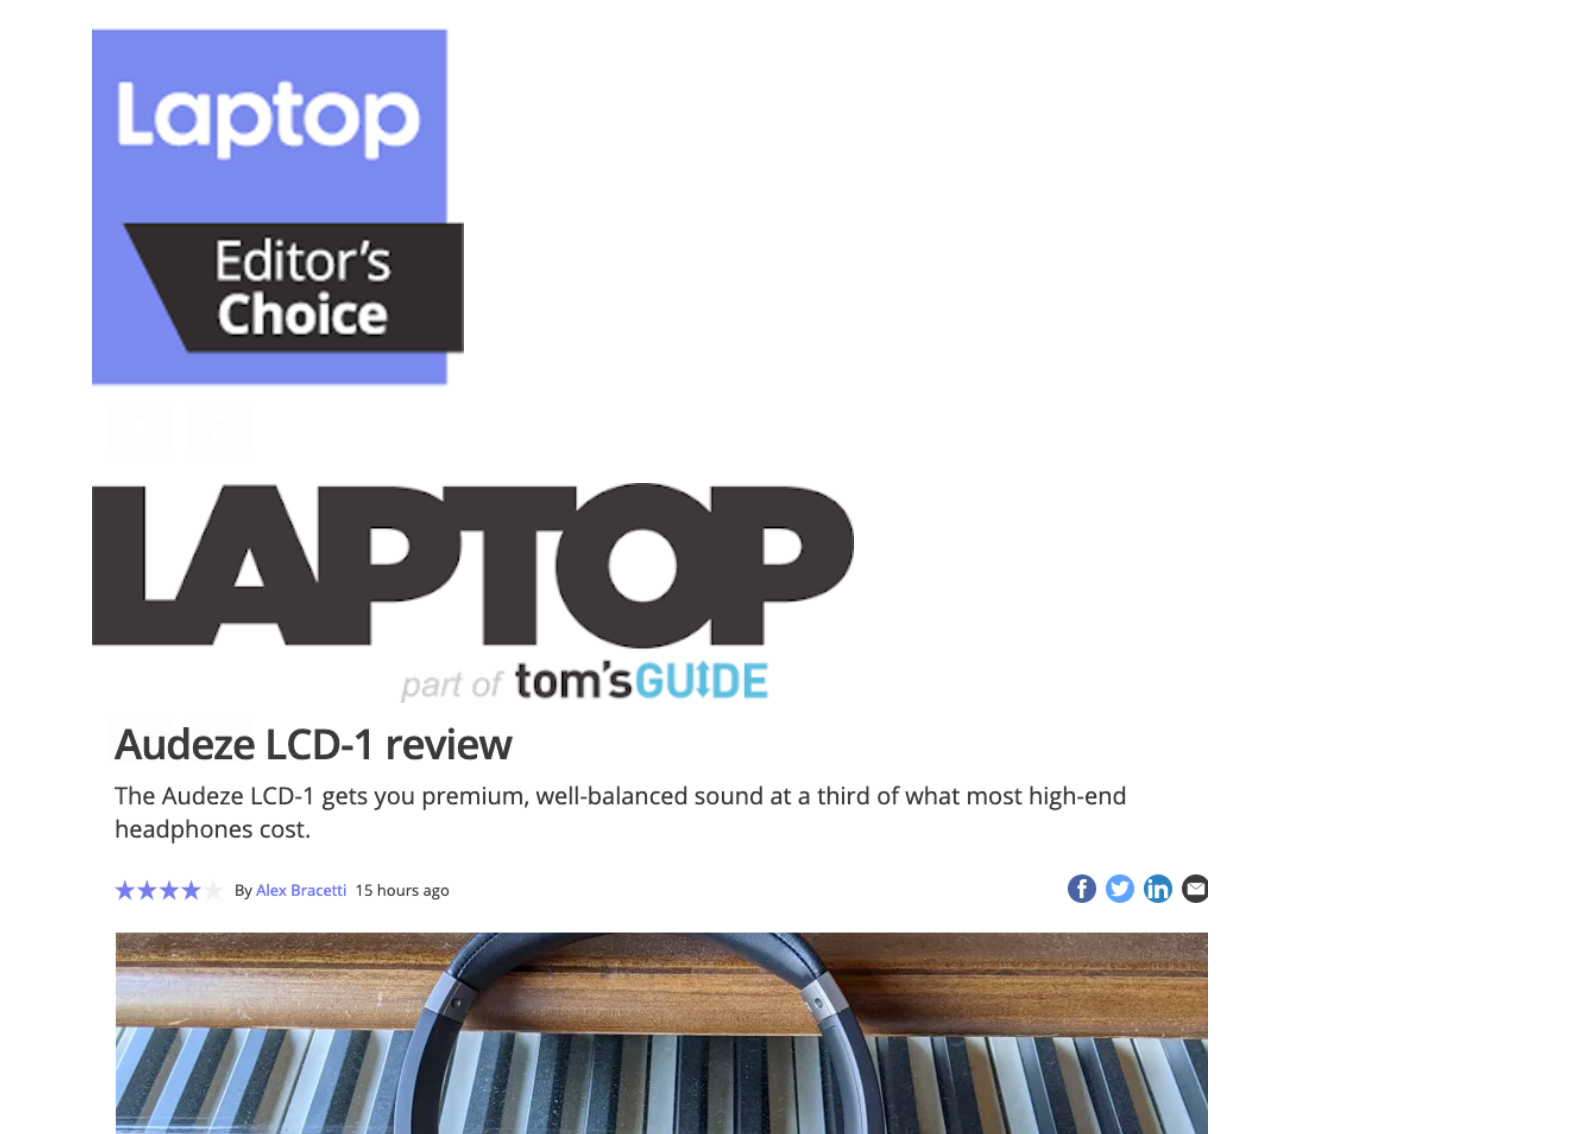 "LCD-1 is a superb model for those who value critical listening" Says Laptop Magazine